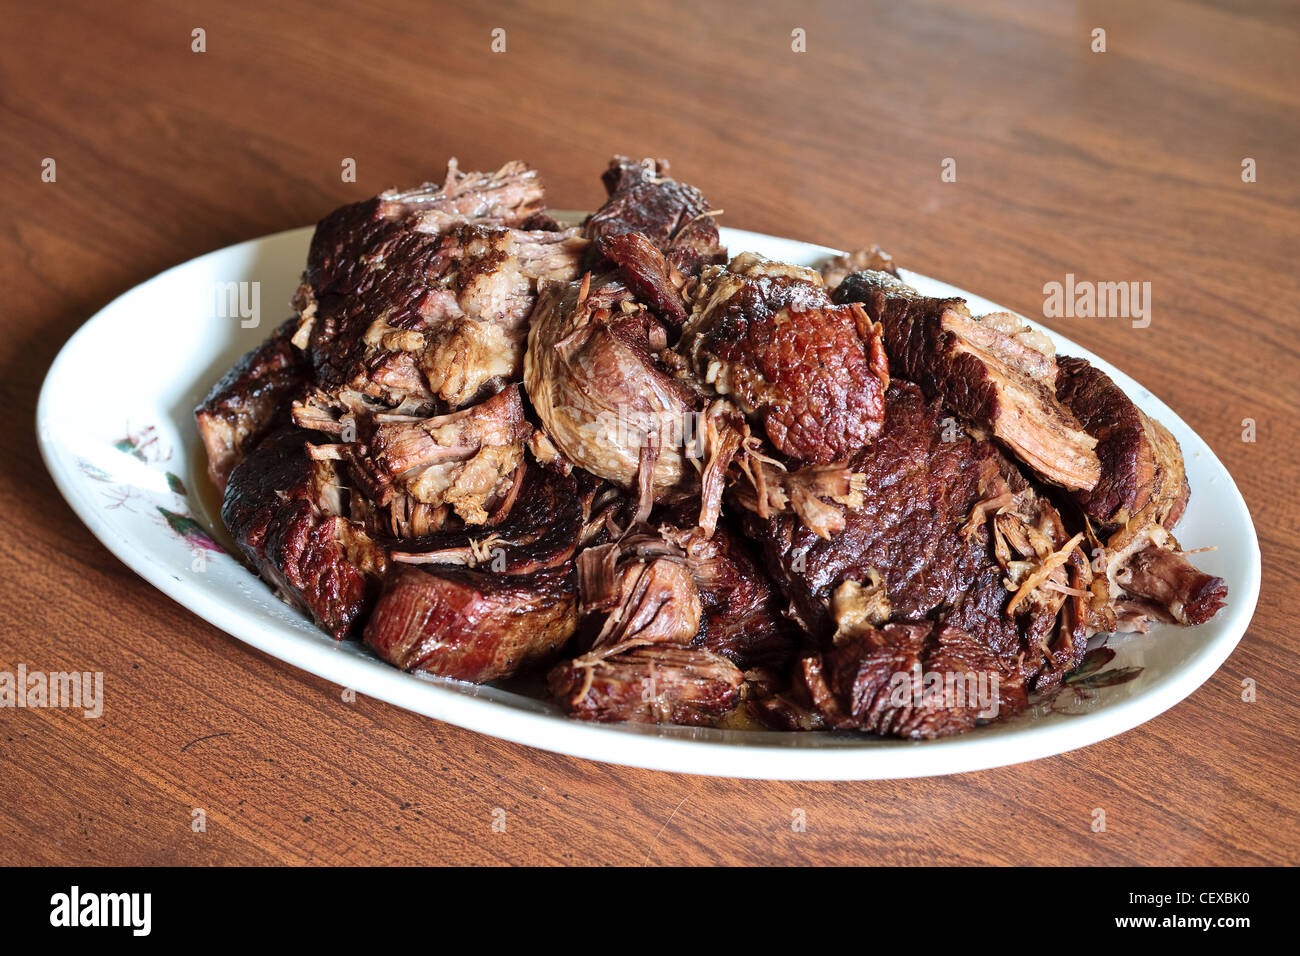 A plate of roast beef Stock Photo